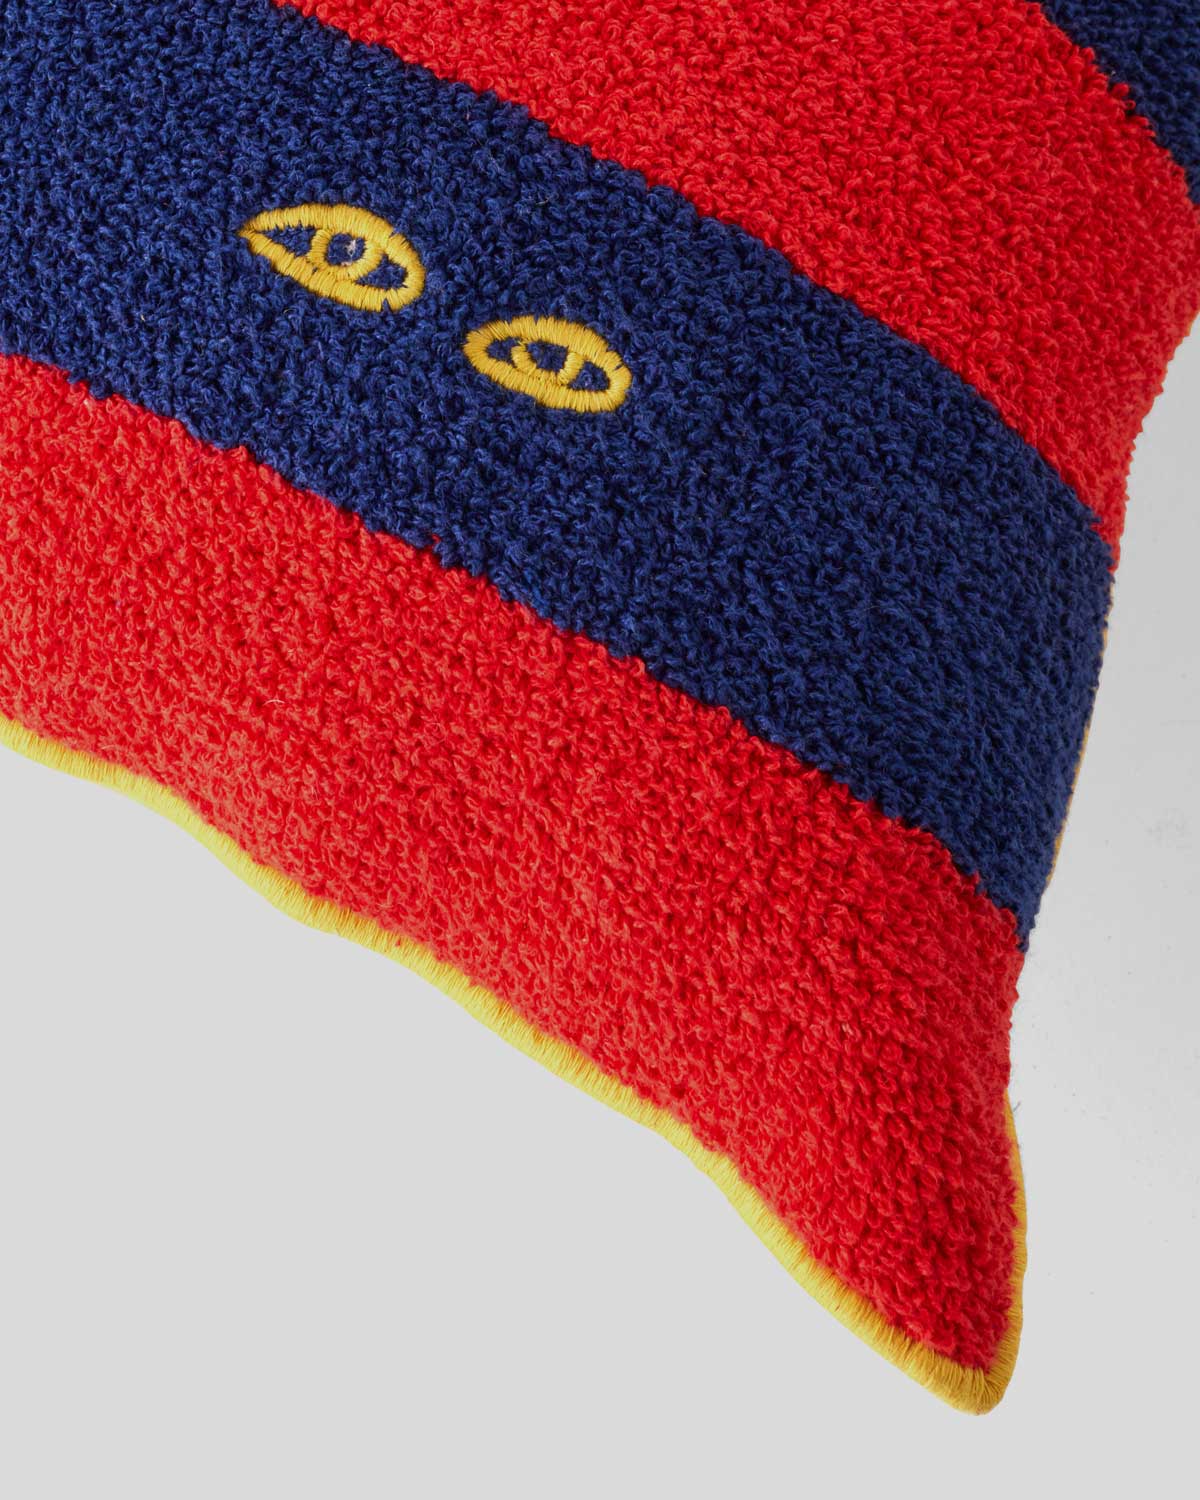 close up of the eyes embroidery on the corner of the Navy & Poppy Stripes w/ Yellow Eyes Coussin